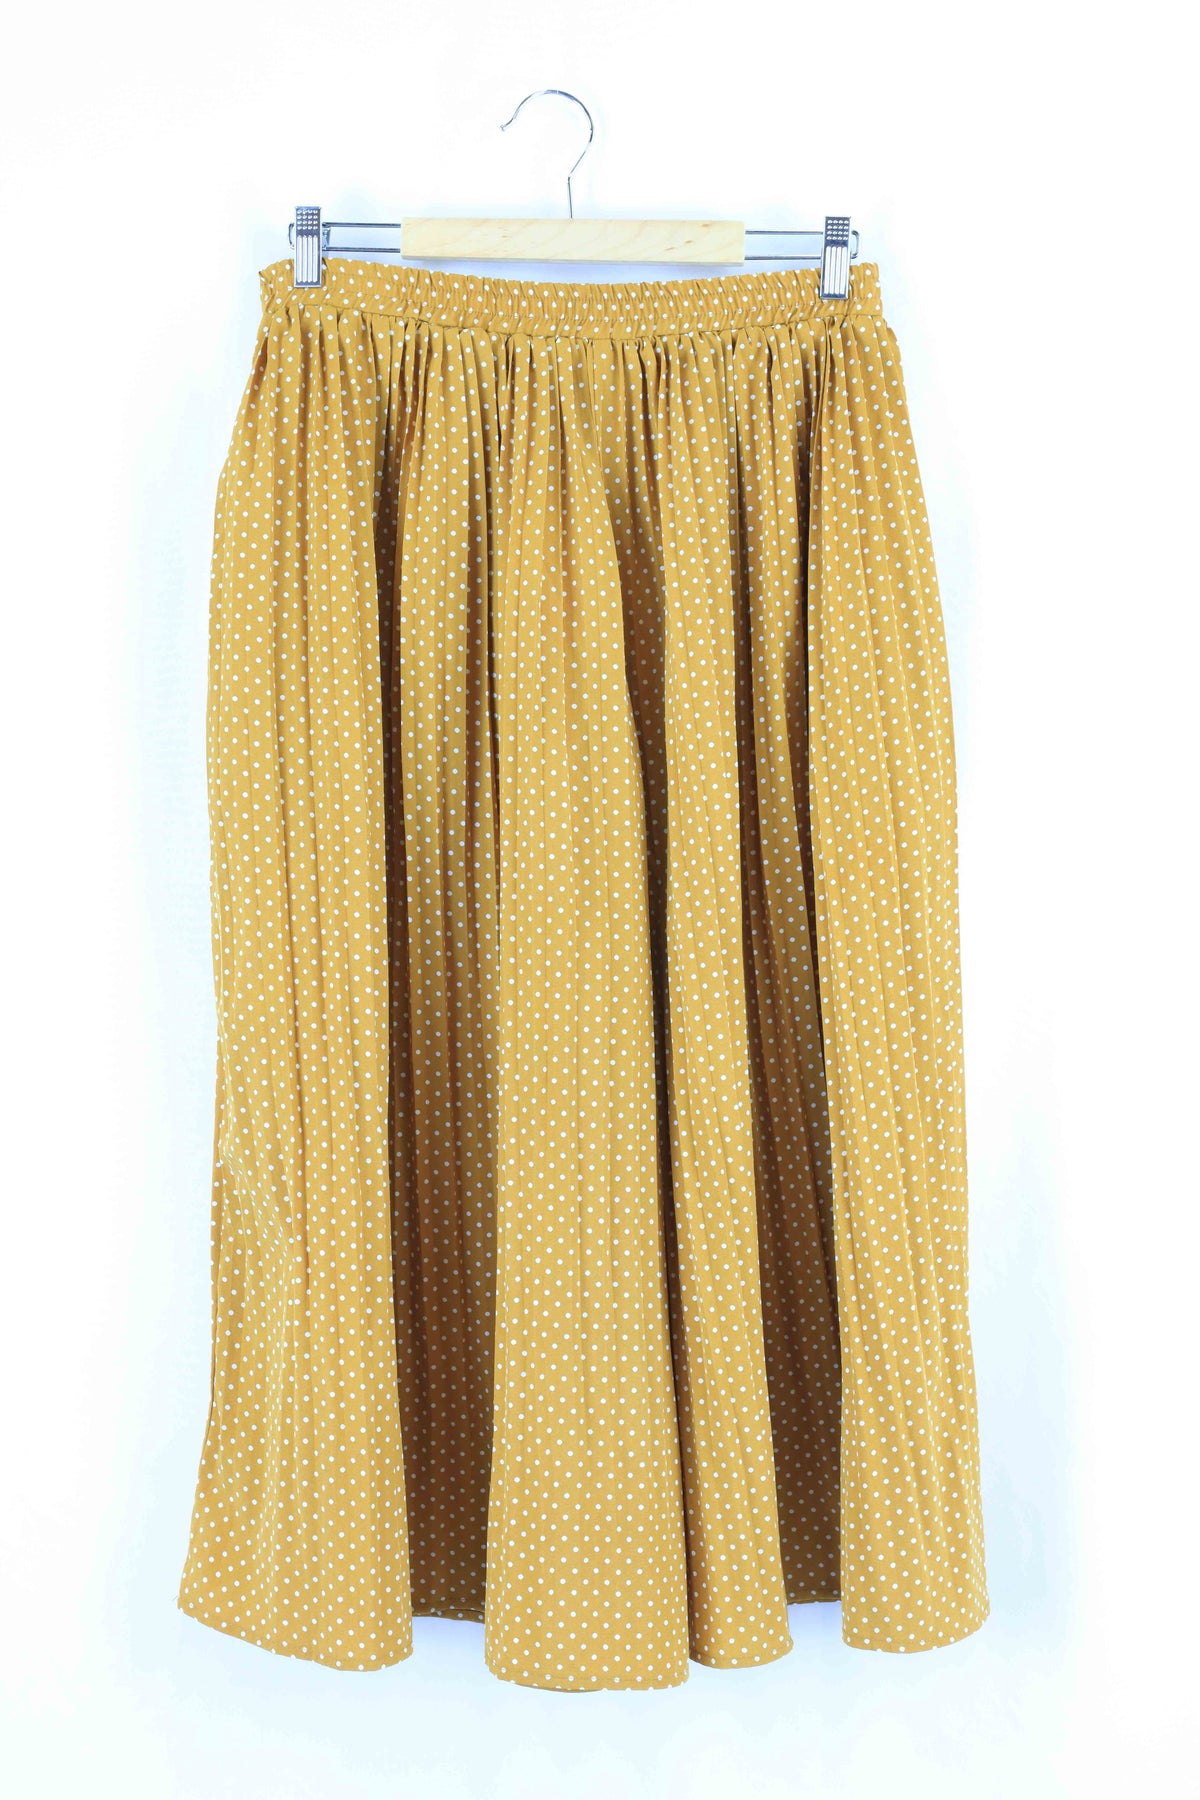 House Of Sienna Mustard and White Polka Dot Wide Leg Pants 12